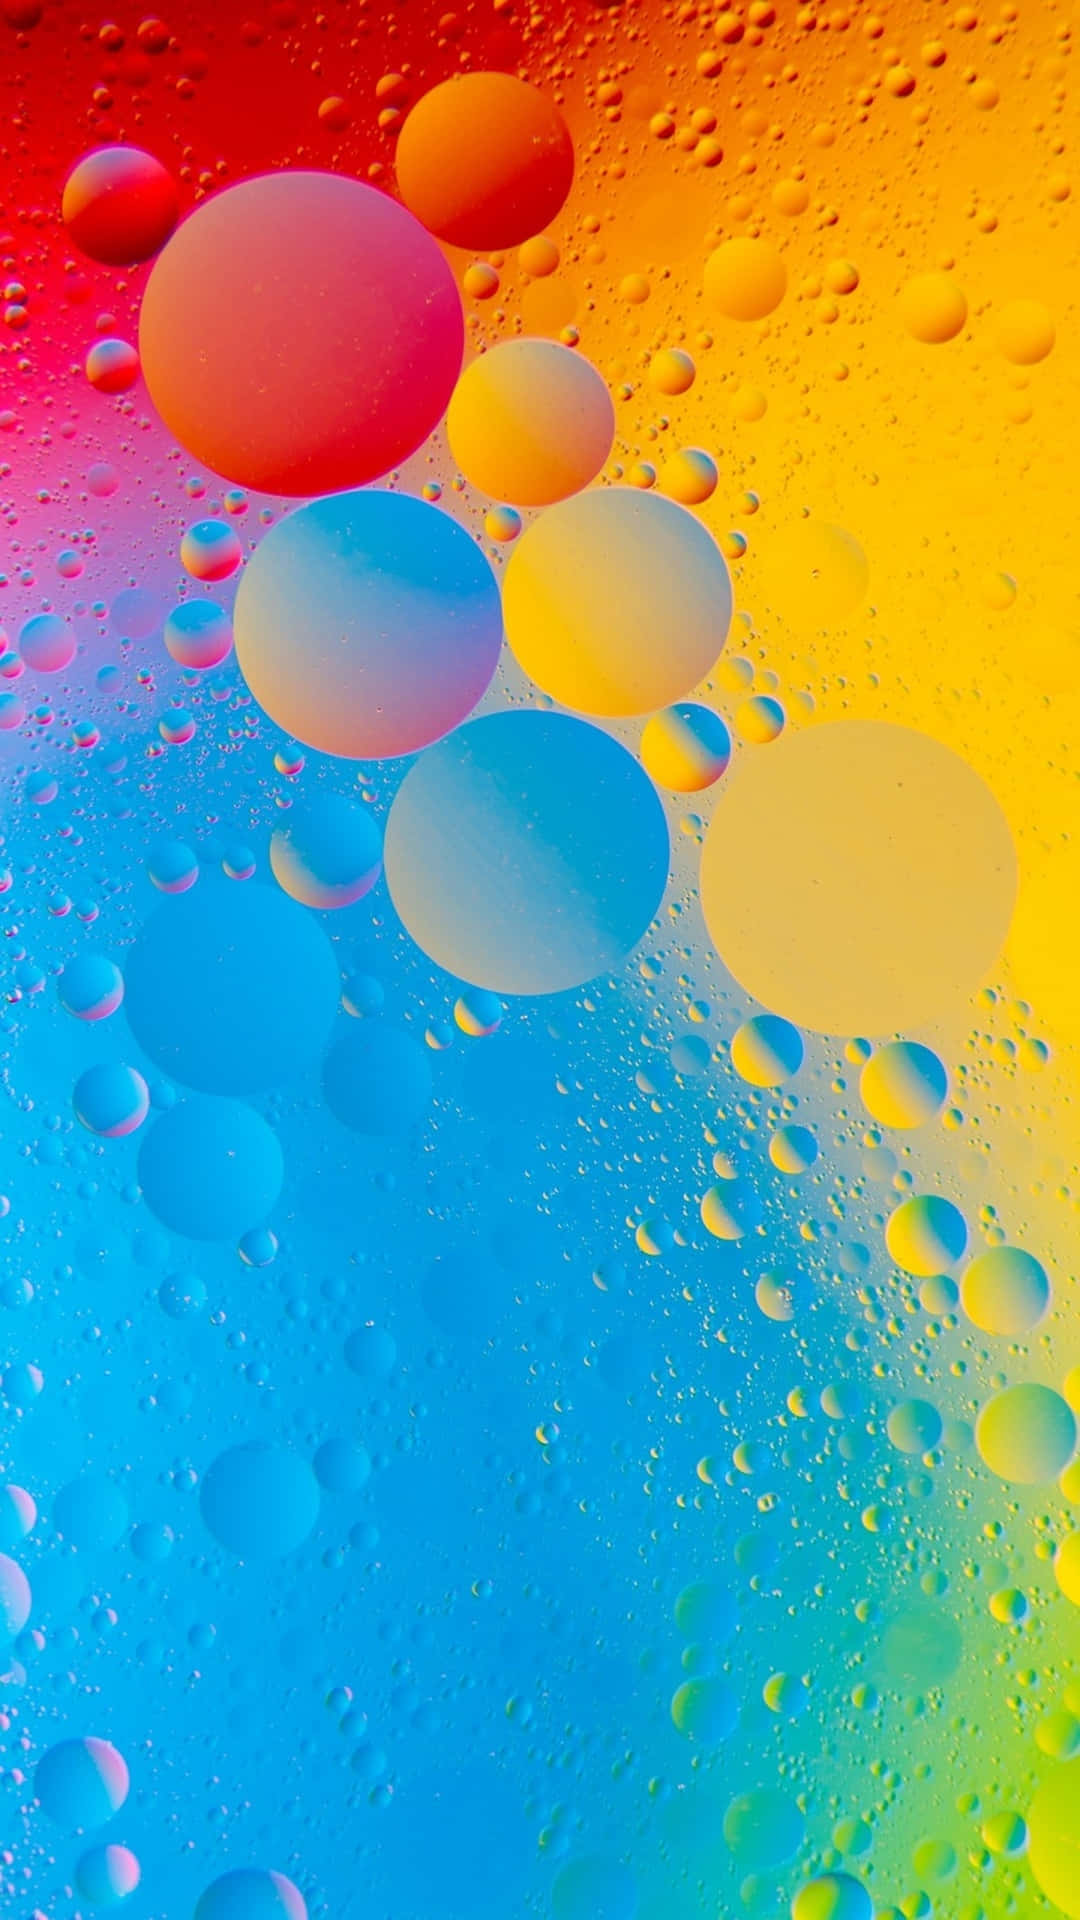 Colorful Oiland Water Abstract Wallpaper